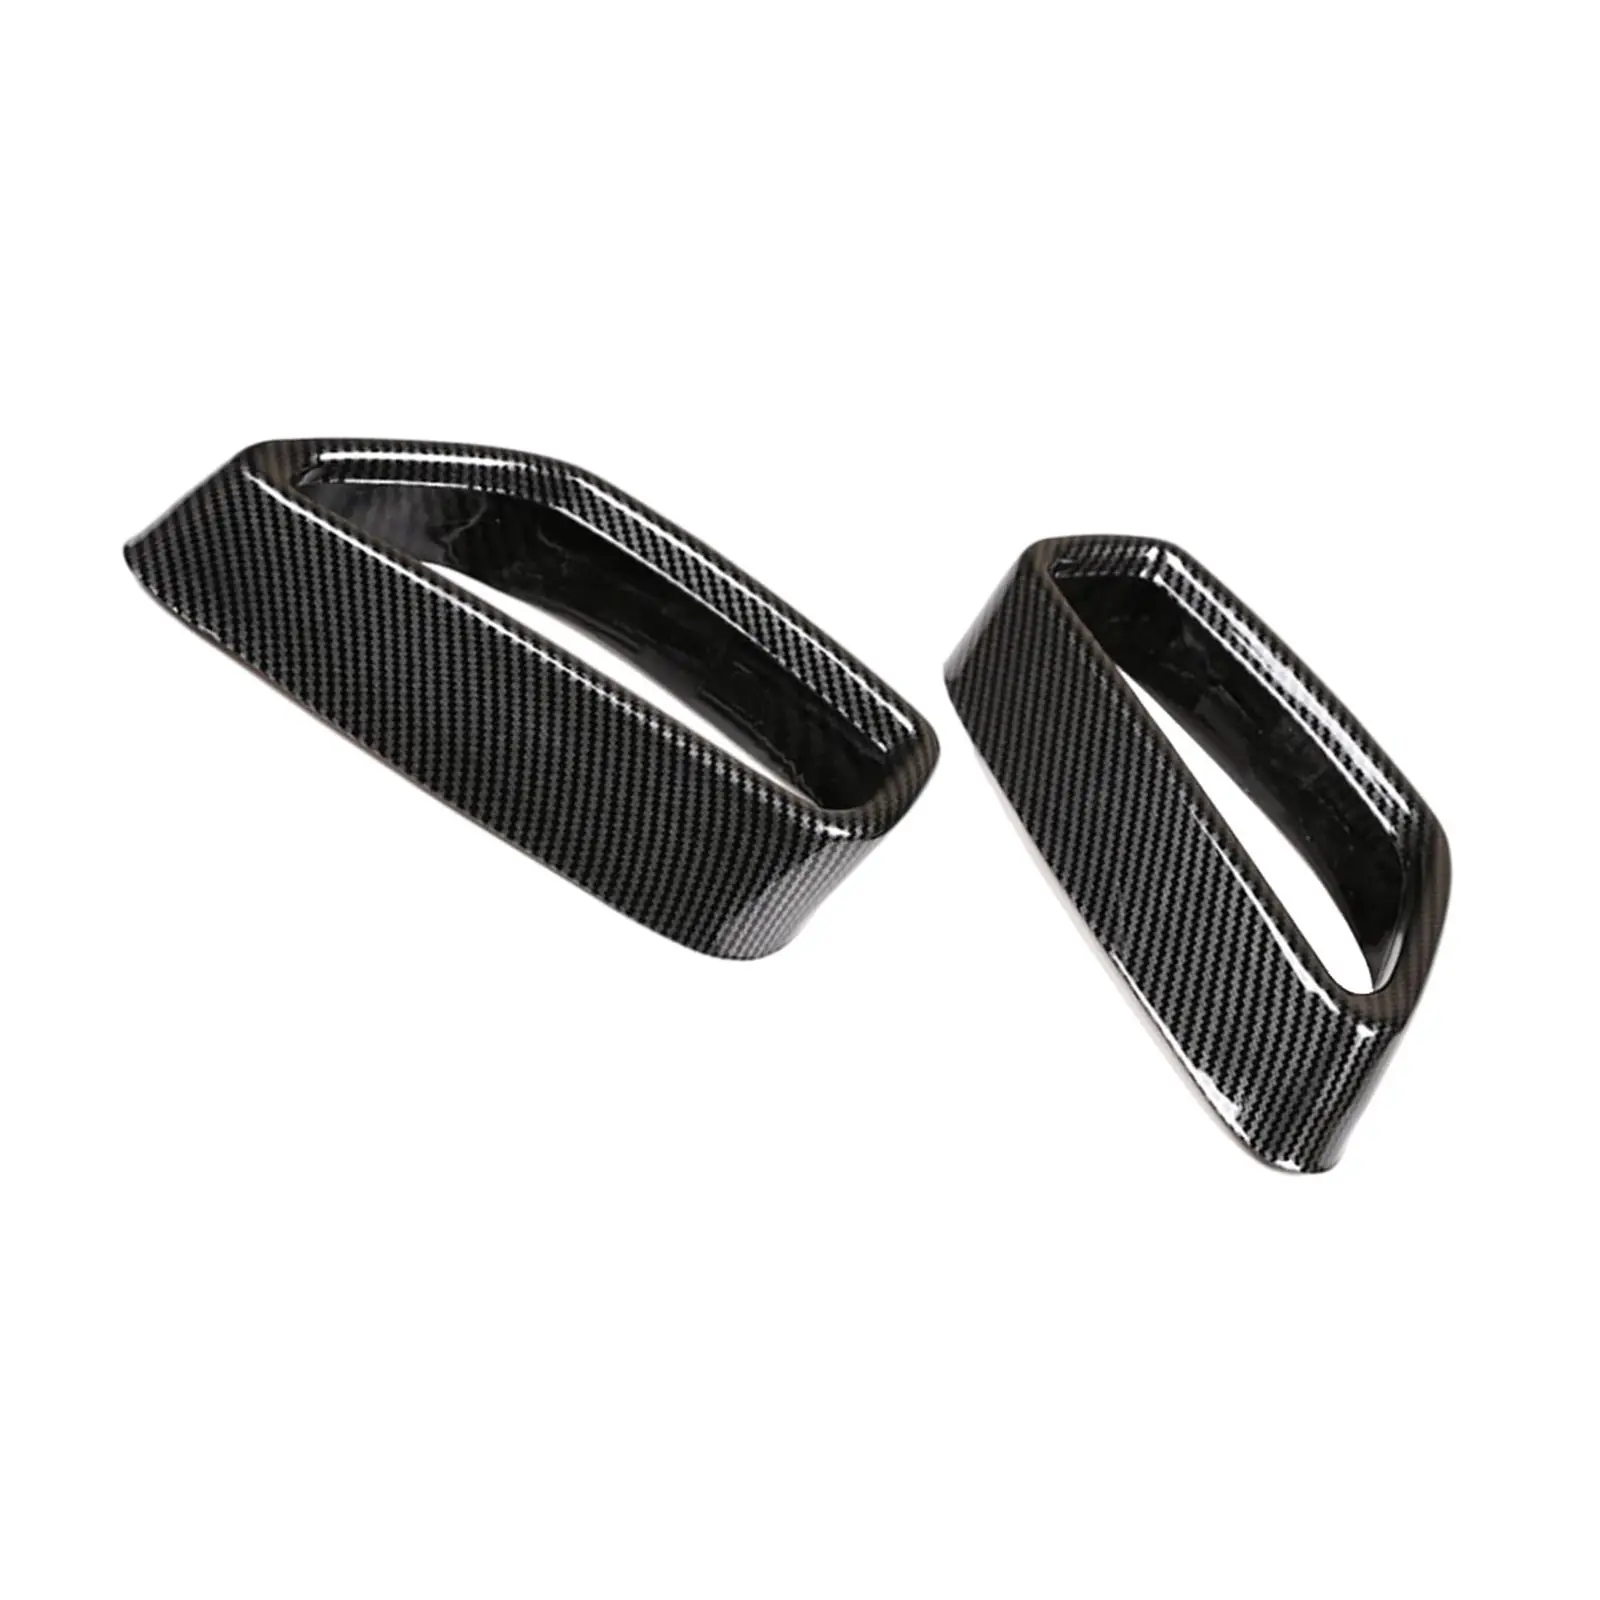 Pair of Tail Throat Frame Decor Rear Exhaust Pipe Throat Cover Trim for BMW 5 Series G30 G38 2018 to 2021